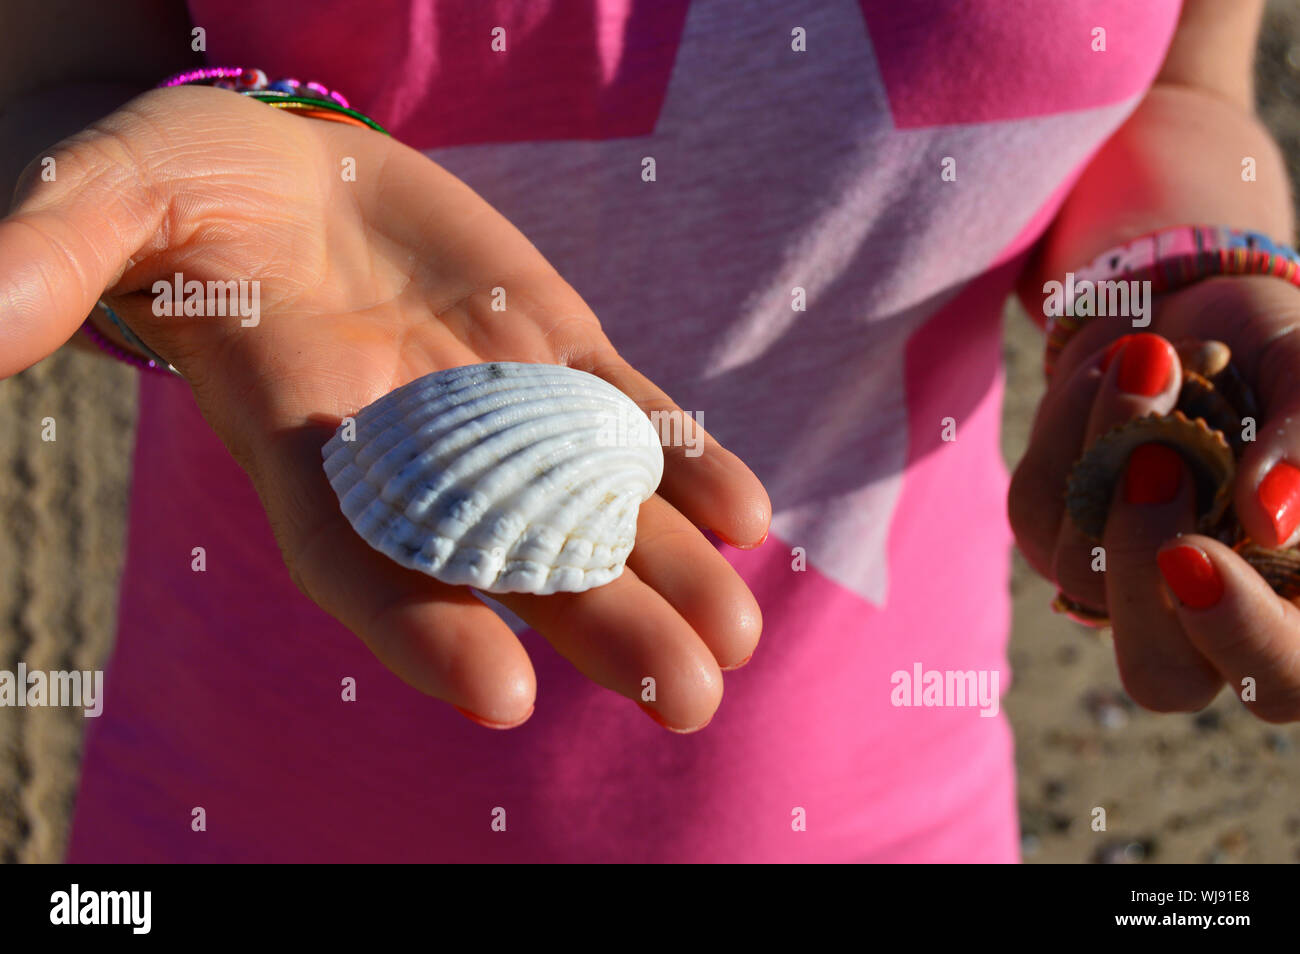 Midsection of Woman Holding Seashells At Beach Banque D'Images